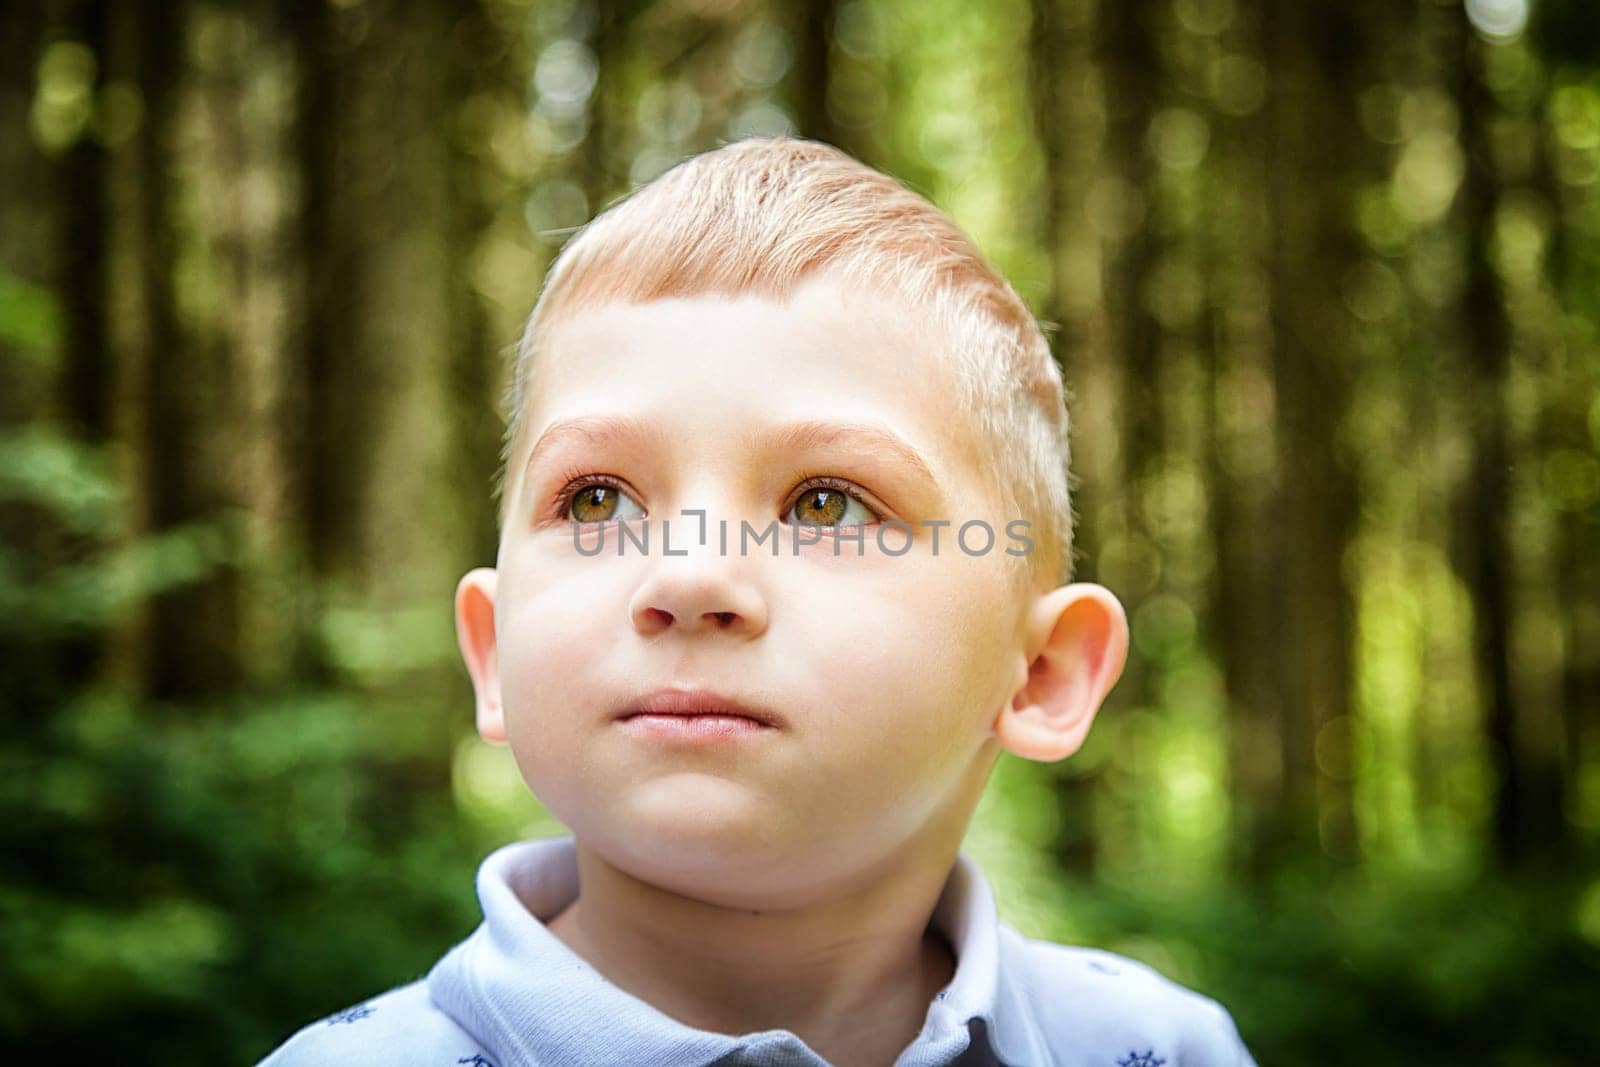 Young Boy in Sunlit Forest. Cute child bathed in dappled sunlight among trees. Walk, rest, nature by keleny